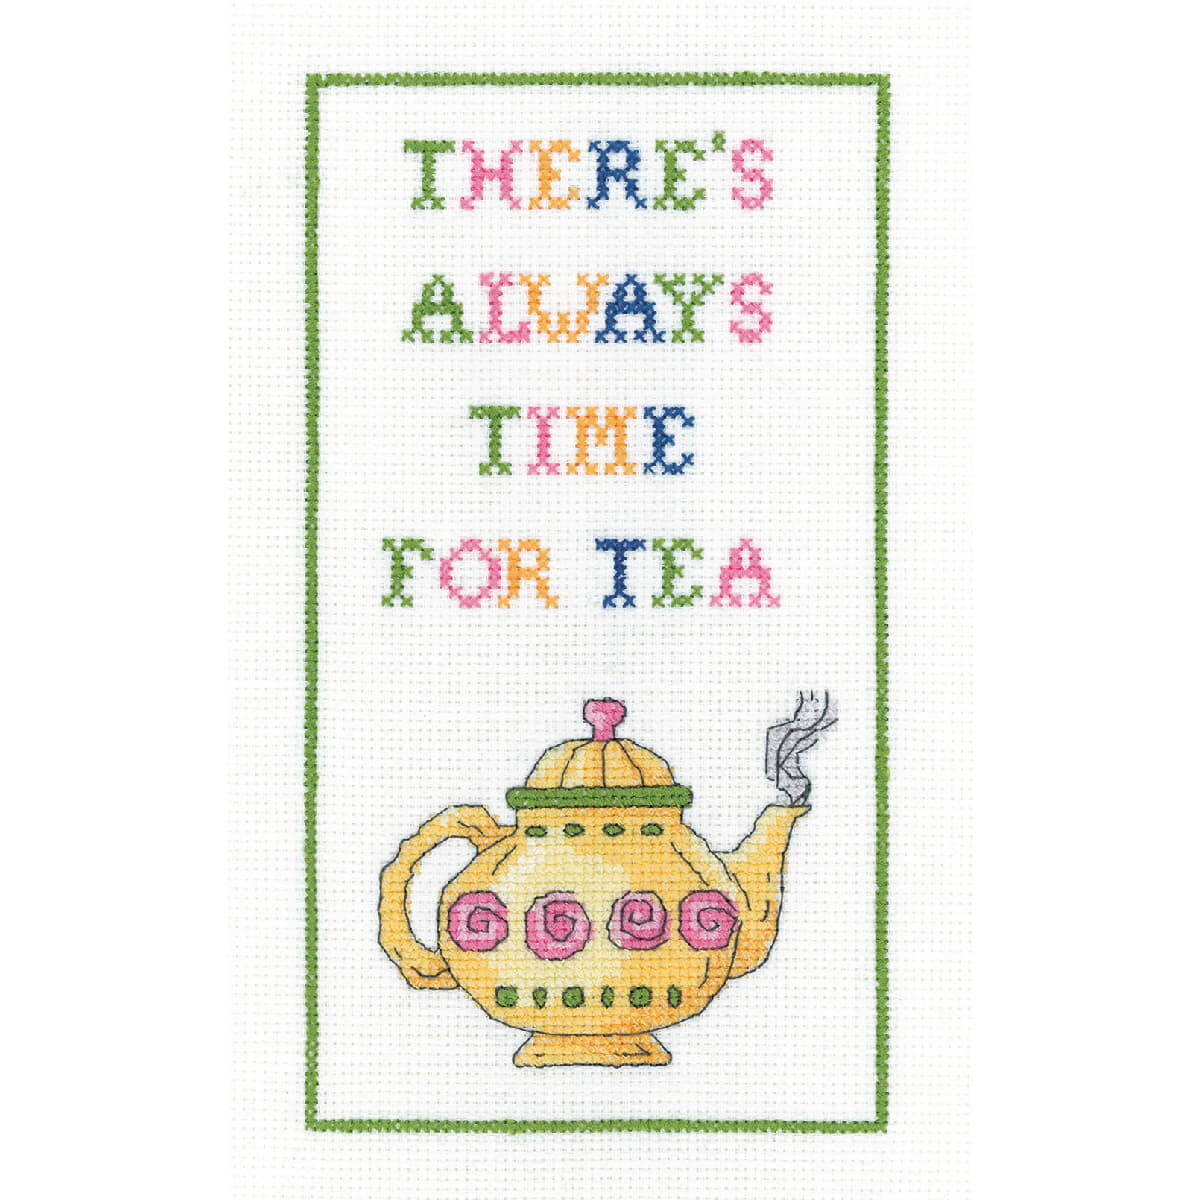 Heritage counted cross stitch kit Aida "Time for Tea...